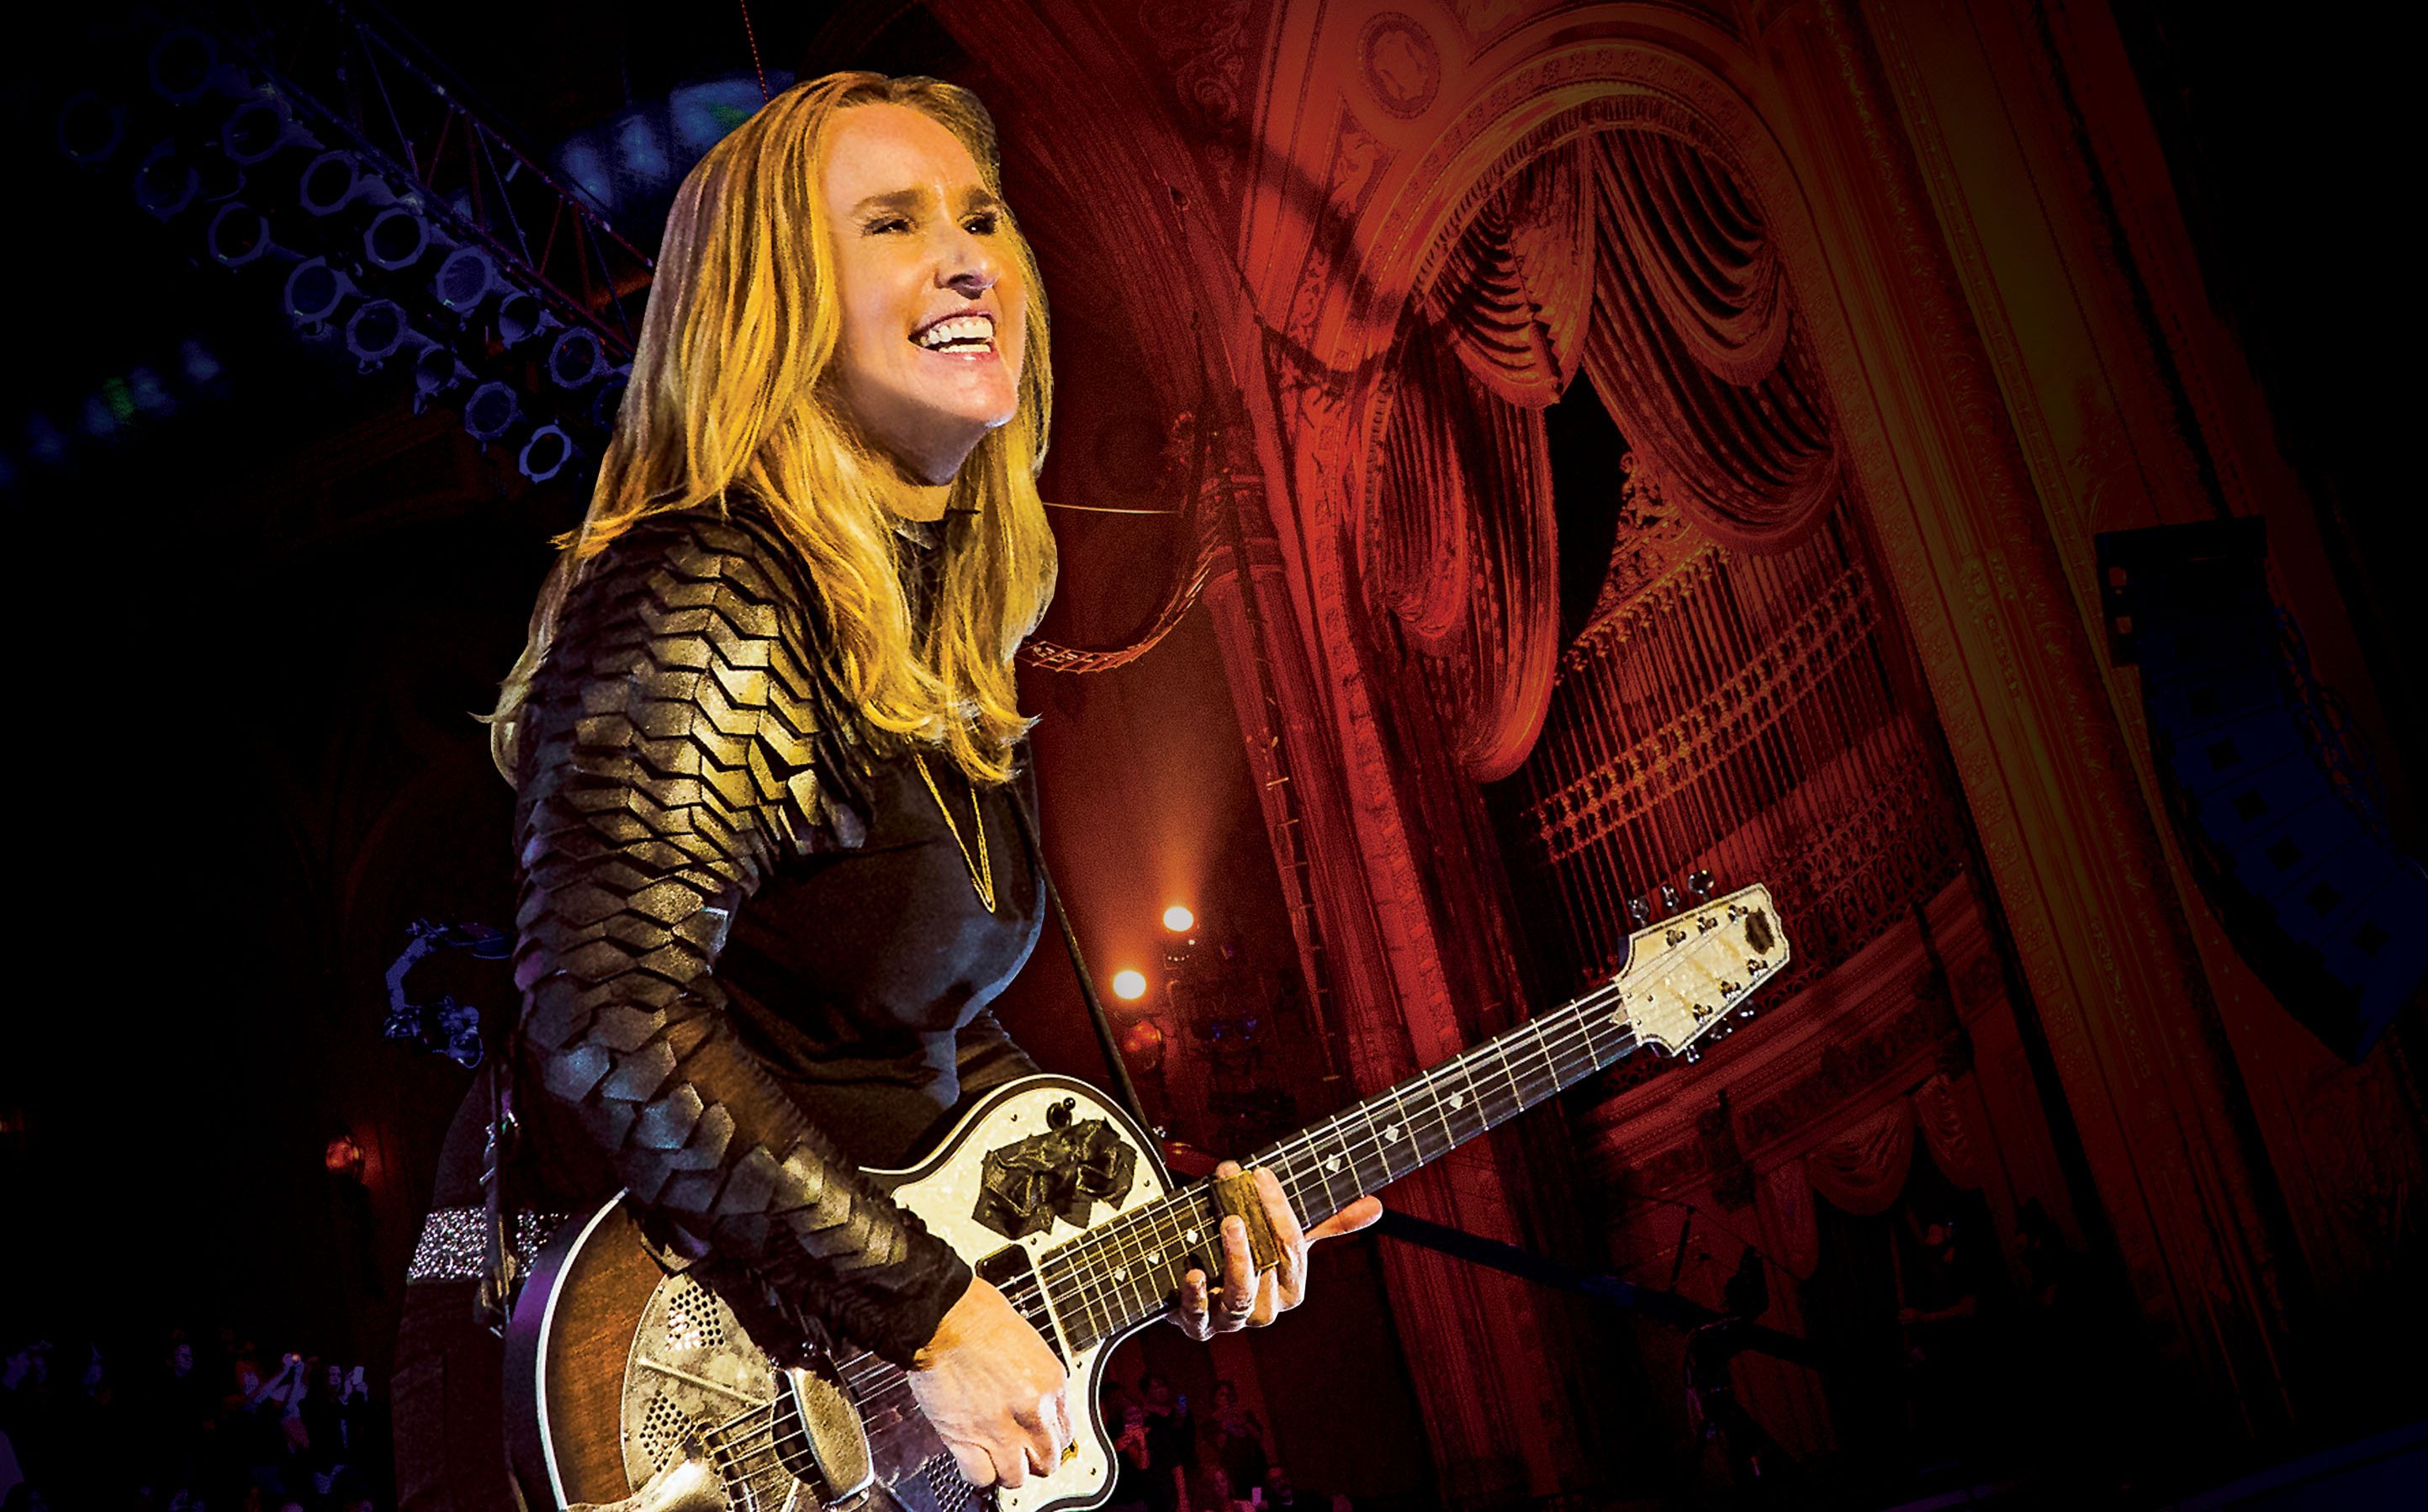 Win 1 of 4 double passes to see Melissa Etheridge and Sheryl Crow